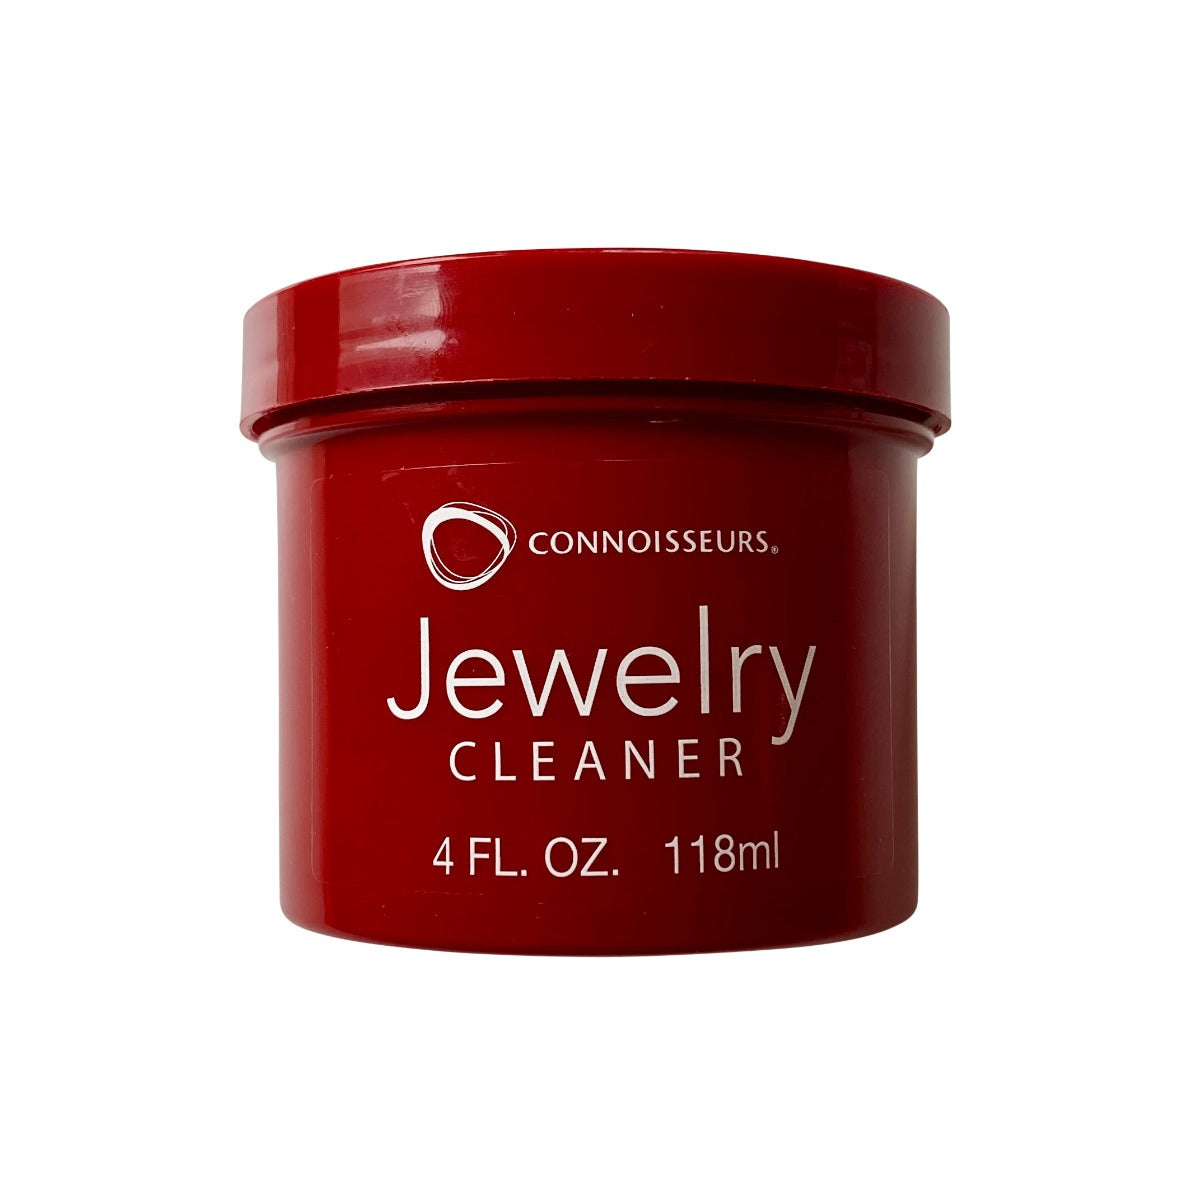 Connoisseurs Jewelry Cleaner 4oz